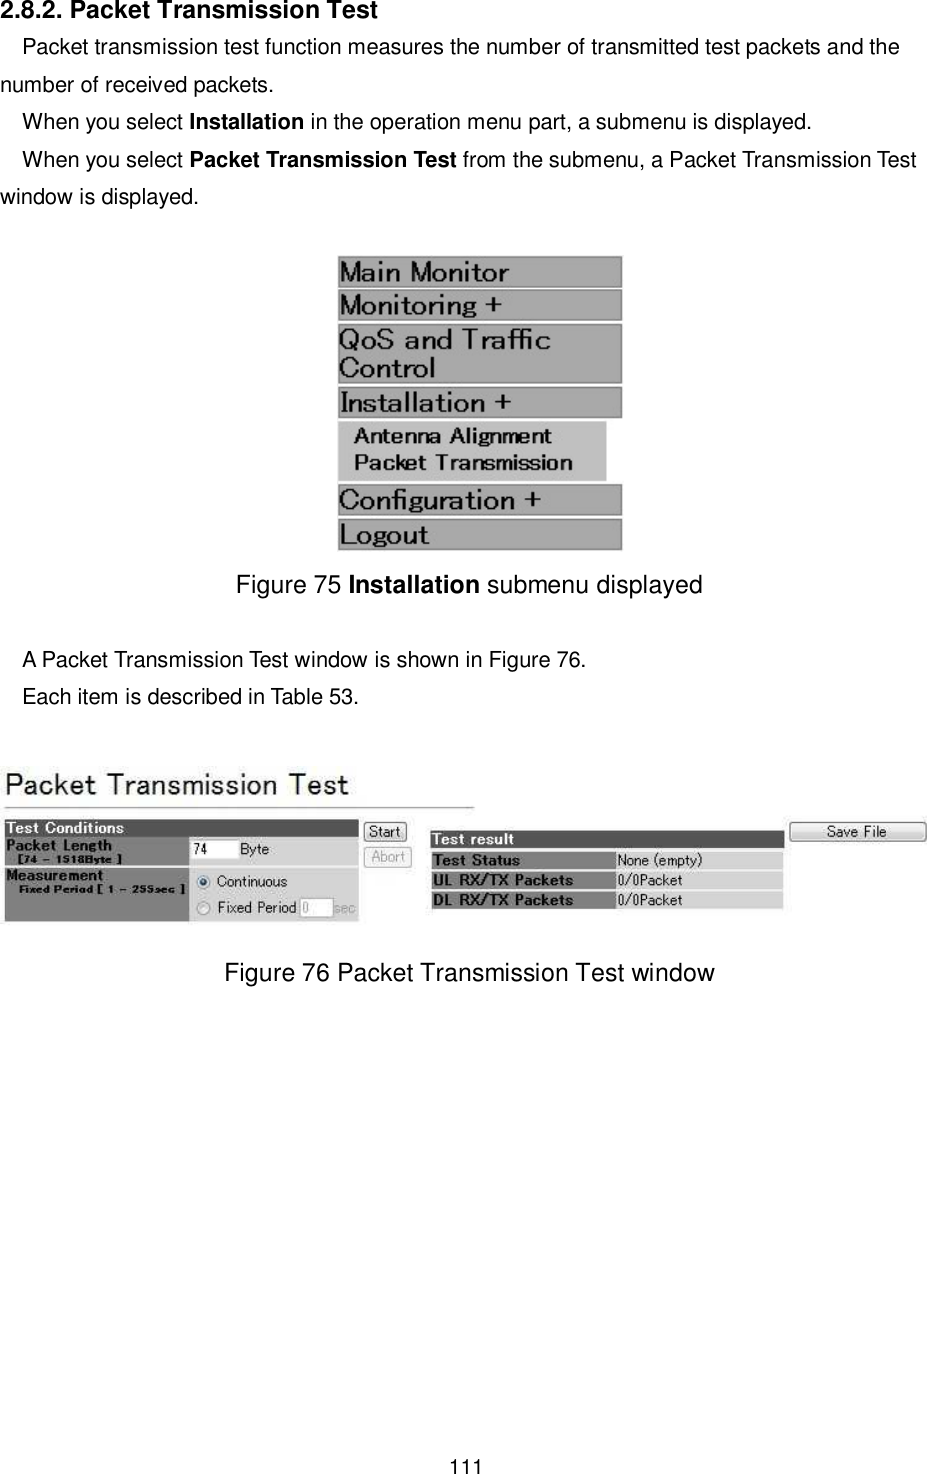    111  2.8.2. Packet Transmission Test Packet transmission test function measures the number of transmitted test packets and the number of received packets. When you select Installation in the operation menu part, a submenu is displayed. When you select Packet Transmission Test from the submenu, a Packet Transmission Test window is displayed.   Figure 75 Installation submenu displayed  A Packet Transmission Test window is shown in Figure 76. Each item is described in Table 53.   Figure 76 Packet Transmission Test window 